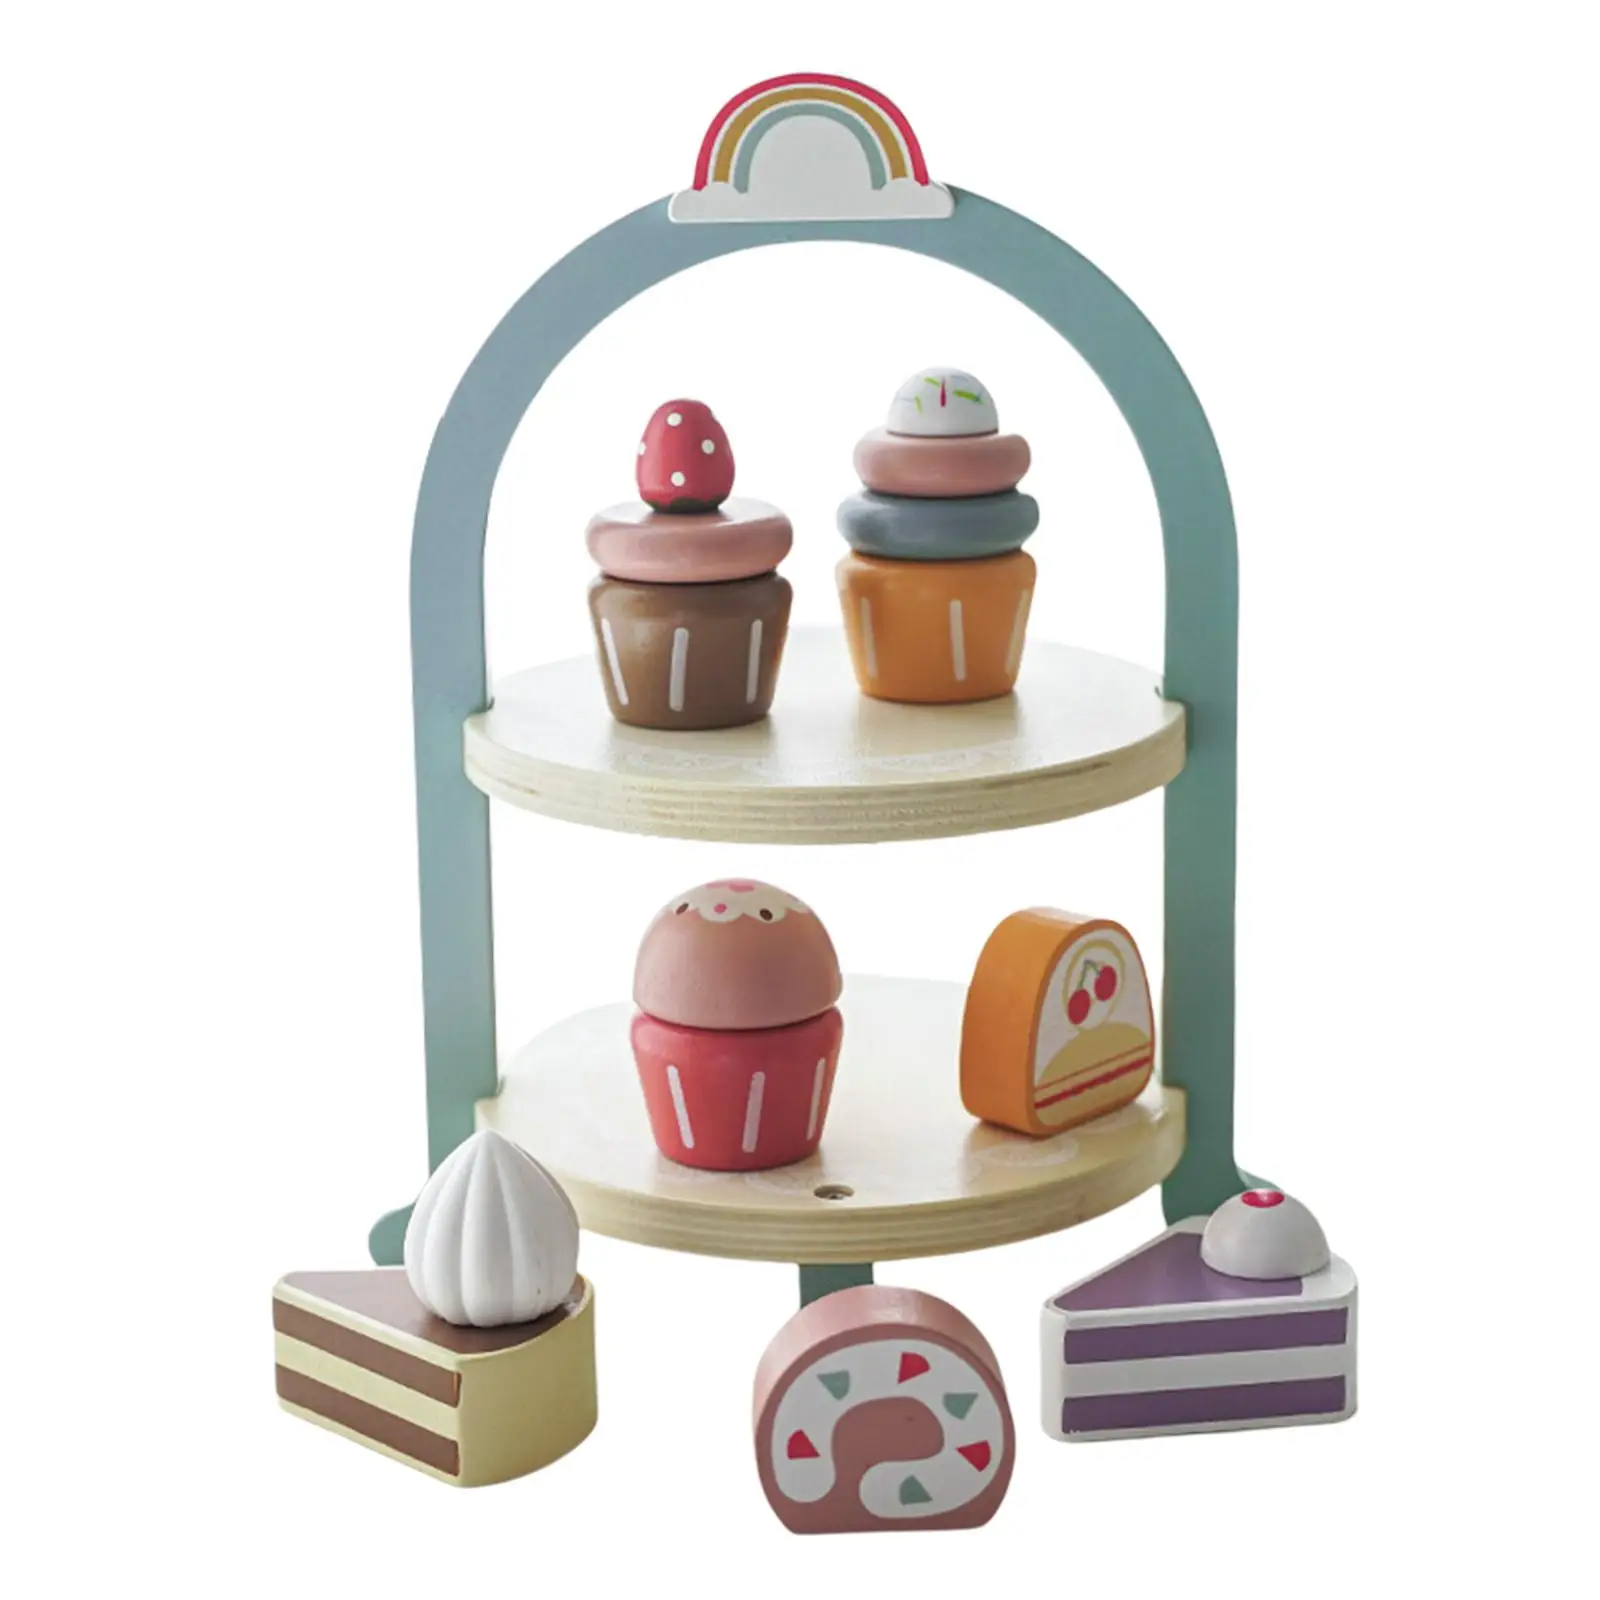 Wooden Dessert Set Fine Motor Skill Cupcake Set with Cake Stand for Boy Girl Preschool Children Early Educational Party Favors